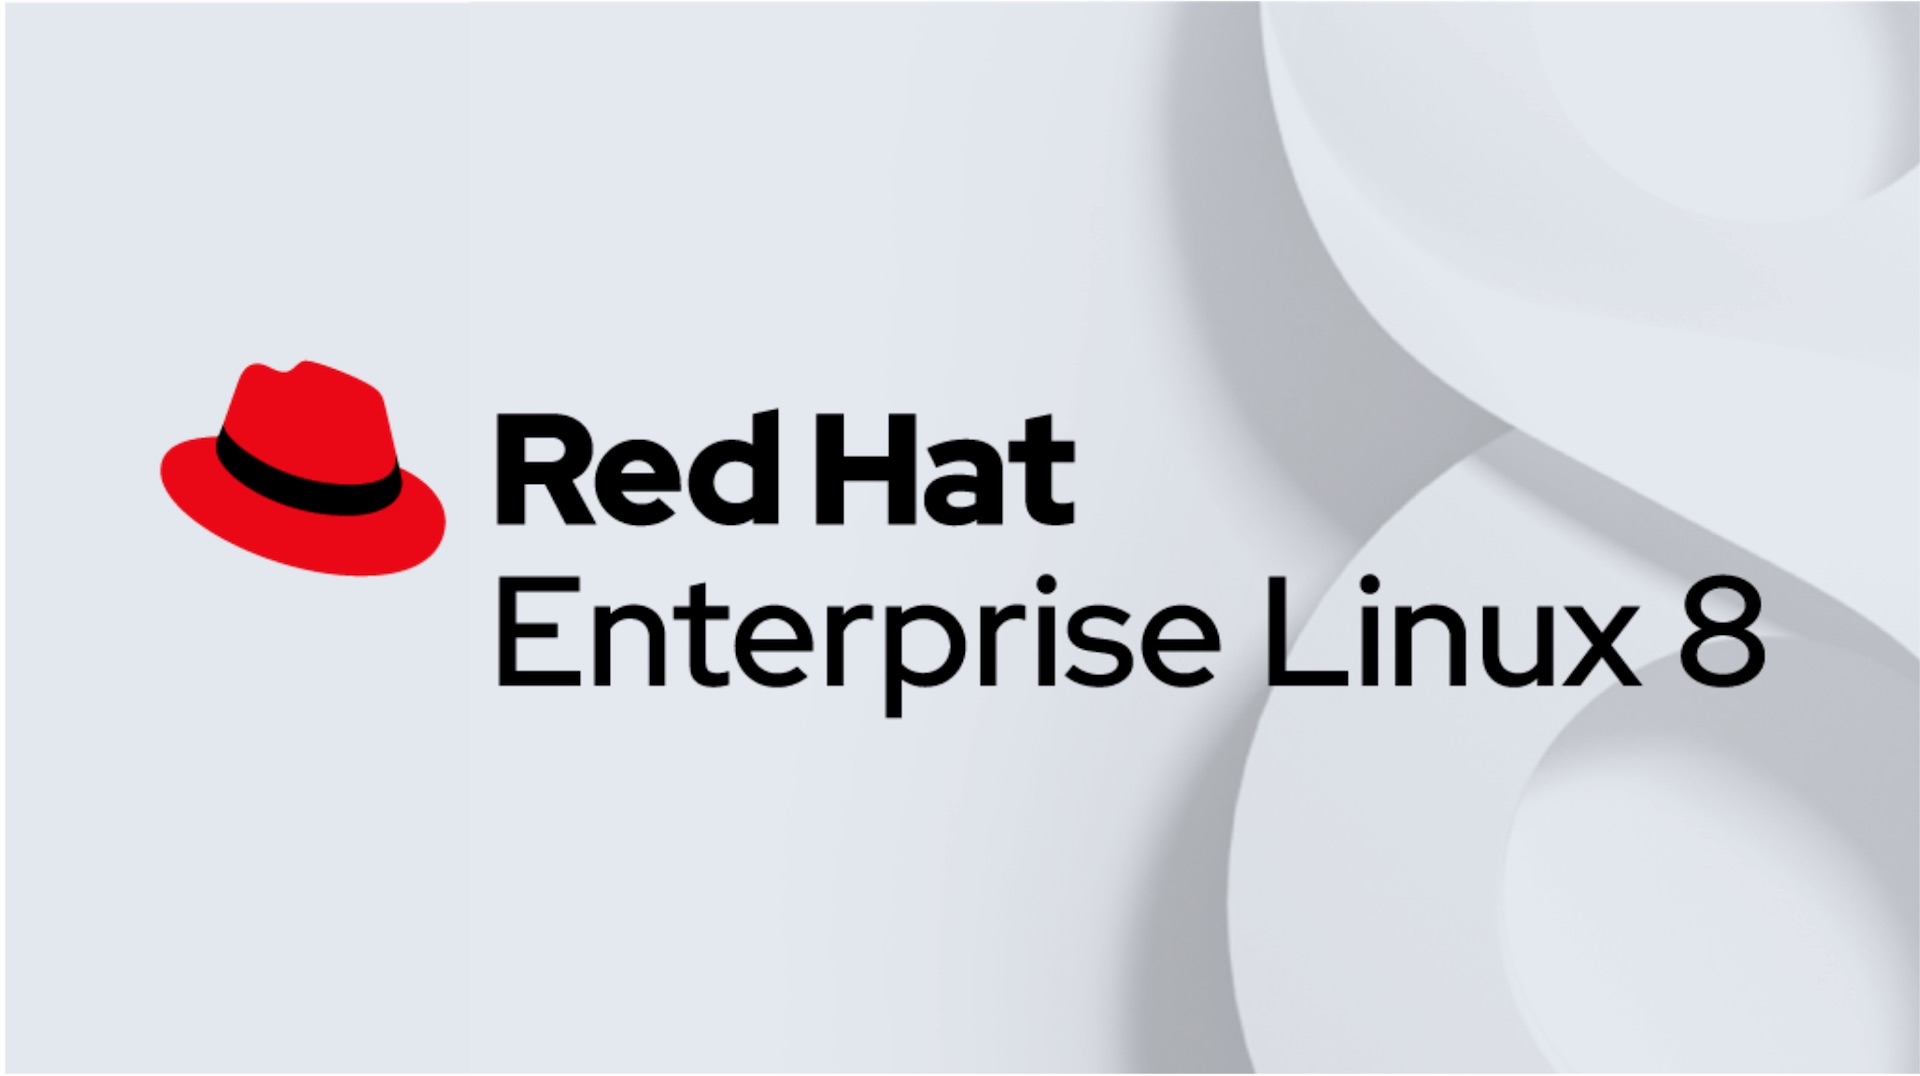 Red Hat Enterprise Linux 8.3 Enters Beta with Improved Security, New System Roles